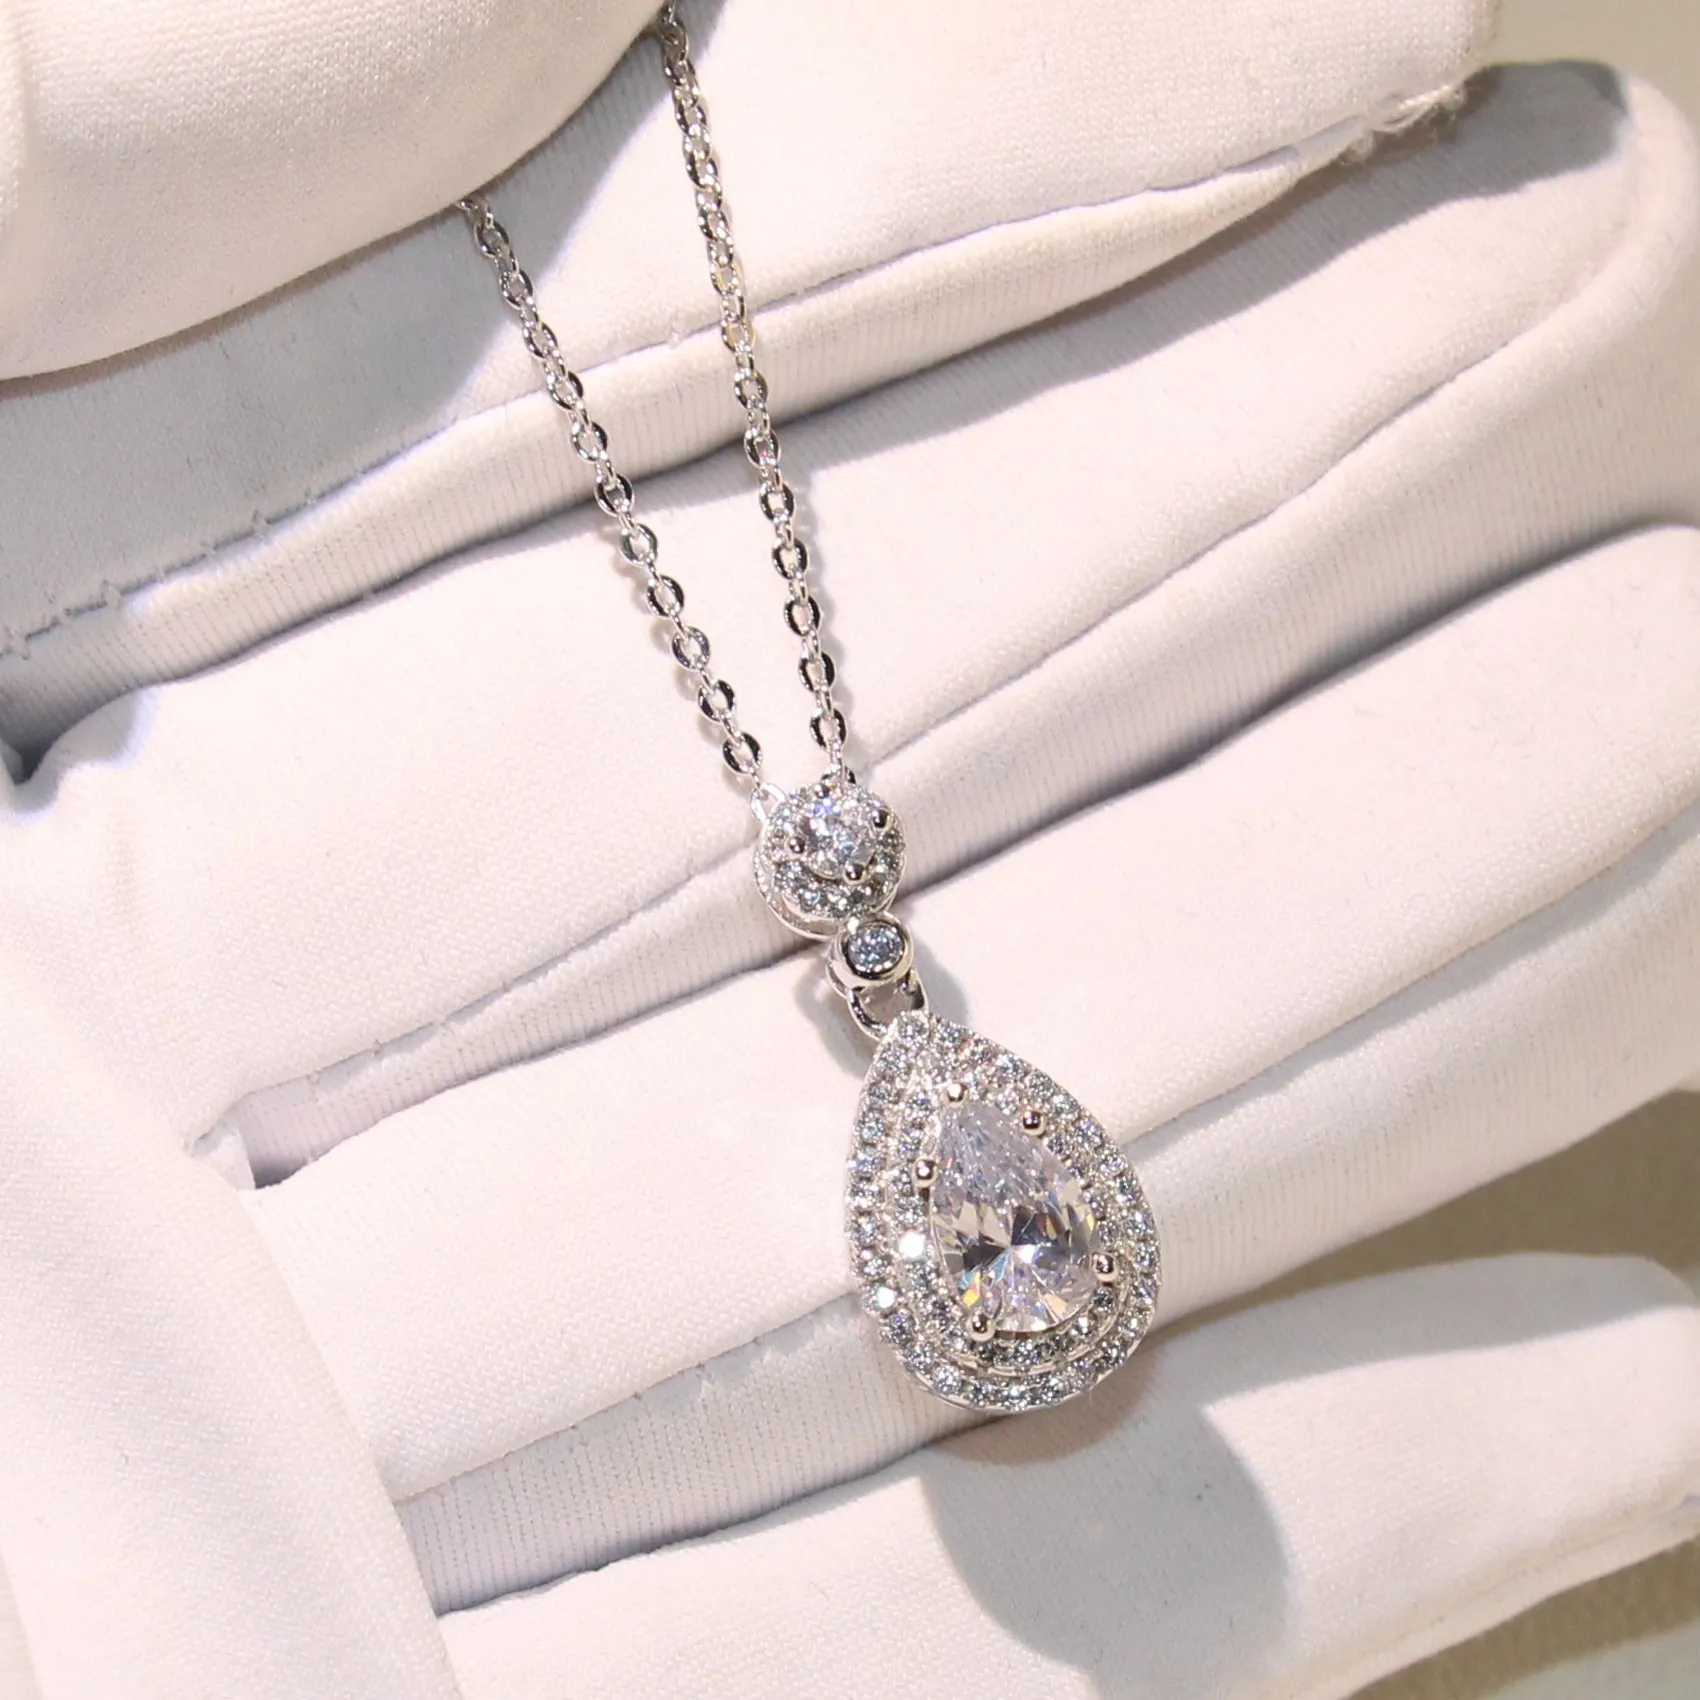 925 Sterling Silver Water Drop Necklace with Pear Shape Topaz CZ Diamond Pendant for Women